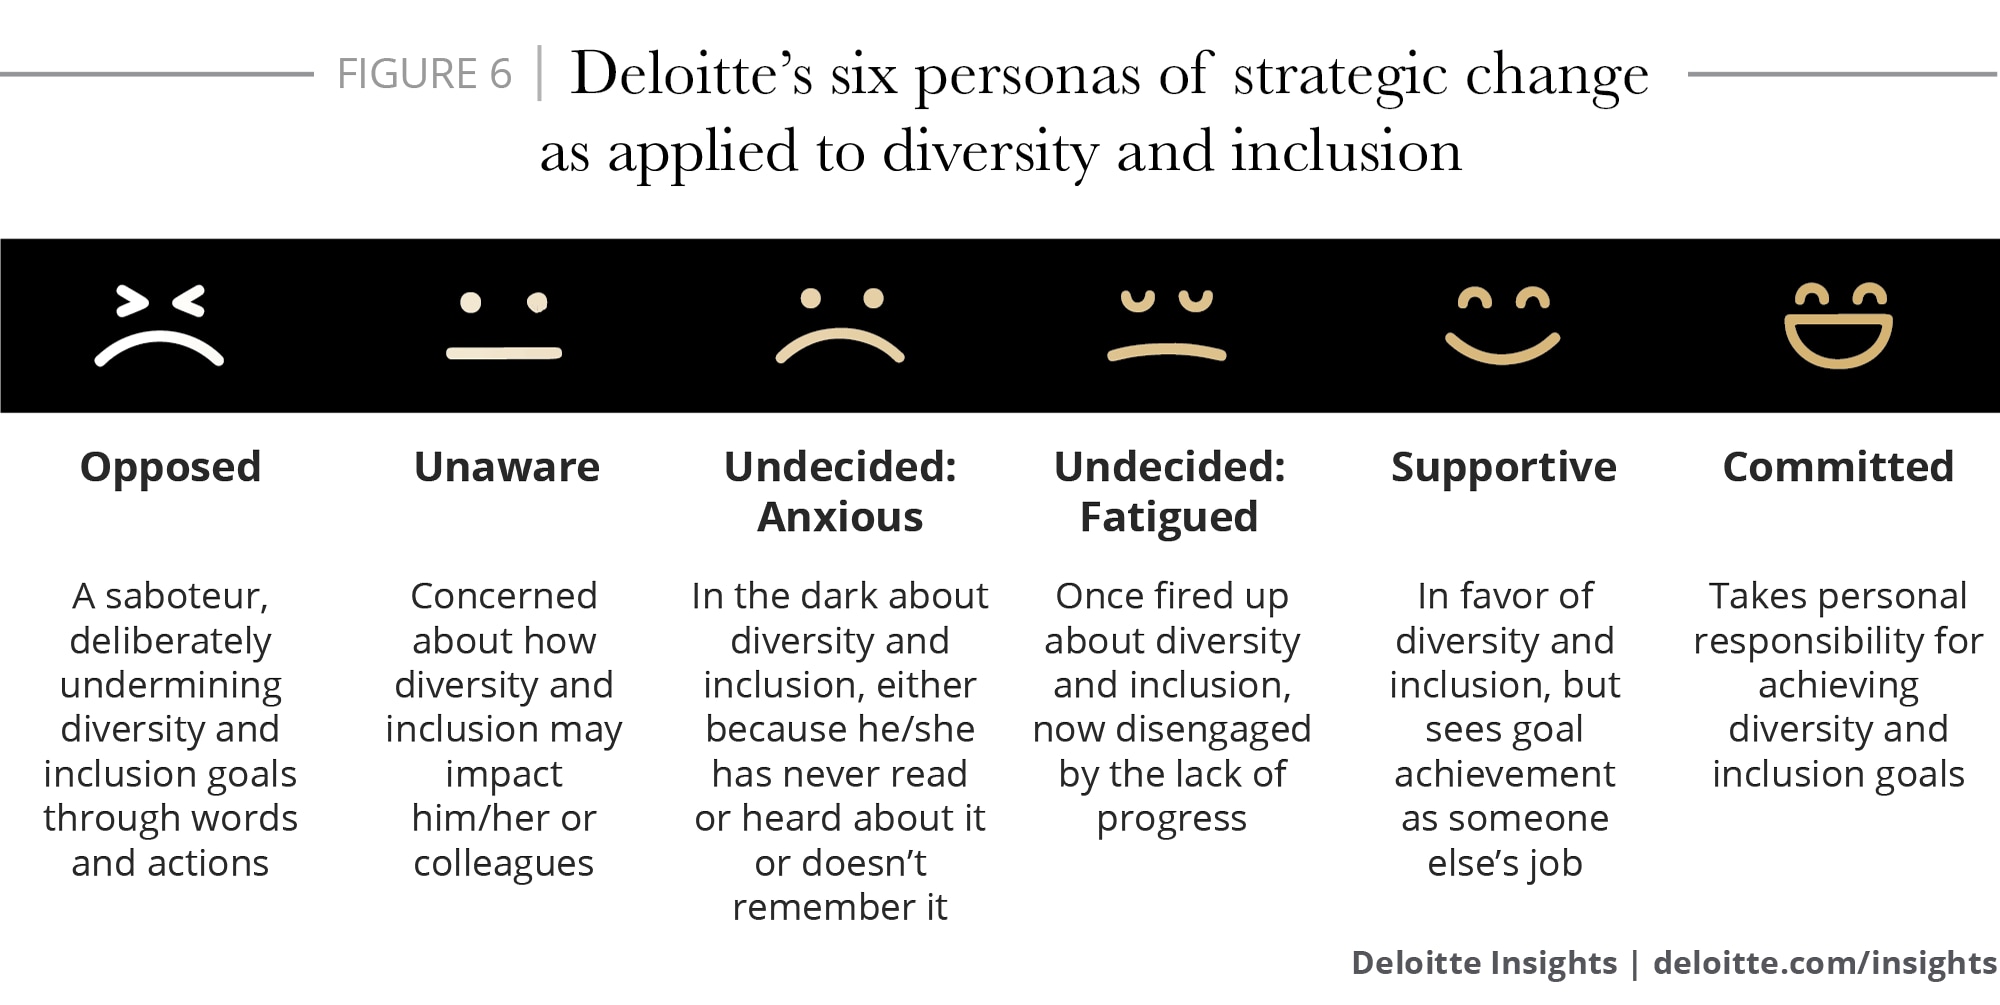 Deloitte’s six personas of strategic change as applied to diversity and inclusion